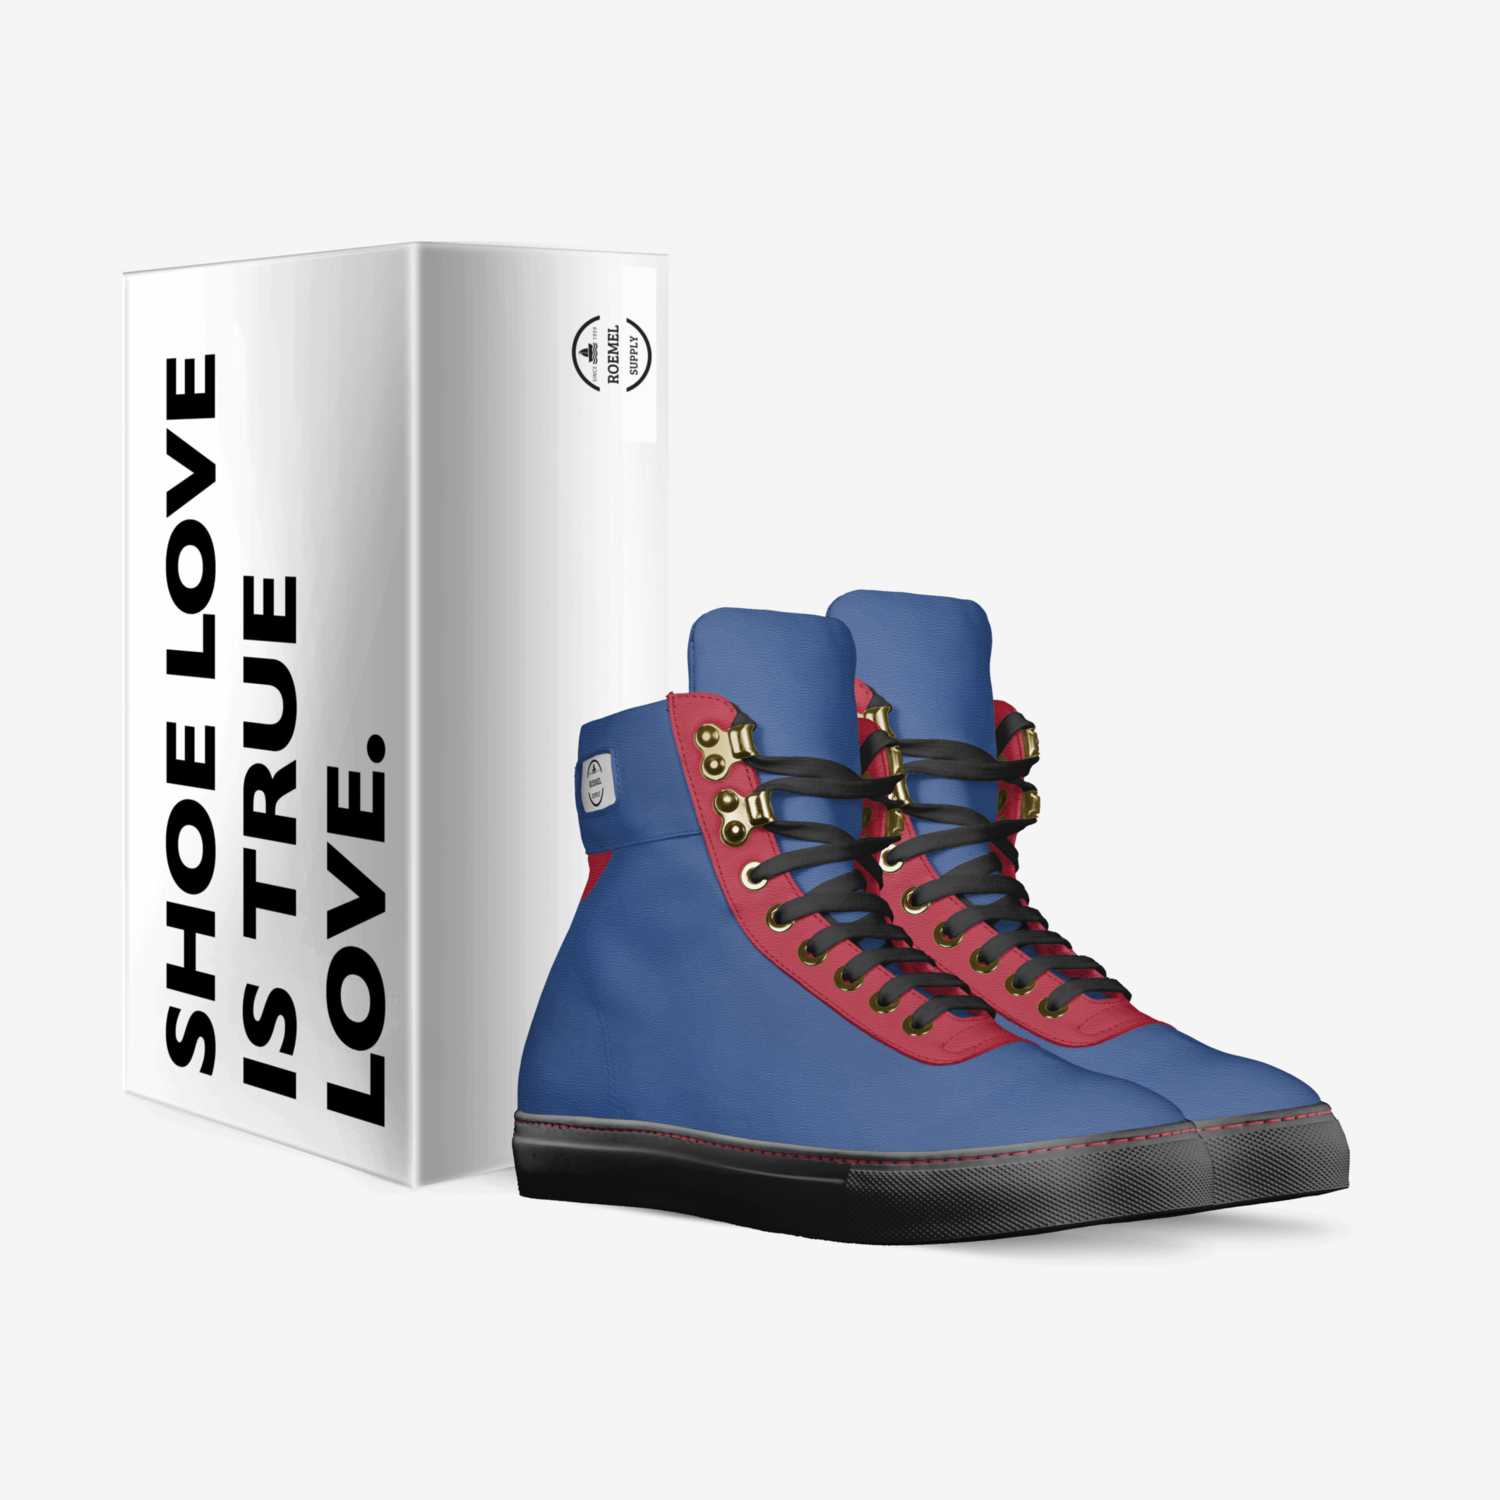 Roemel custom made in Italy shoes by Roemel | Box view